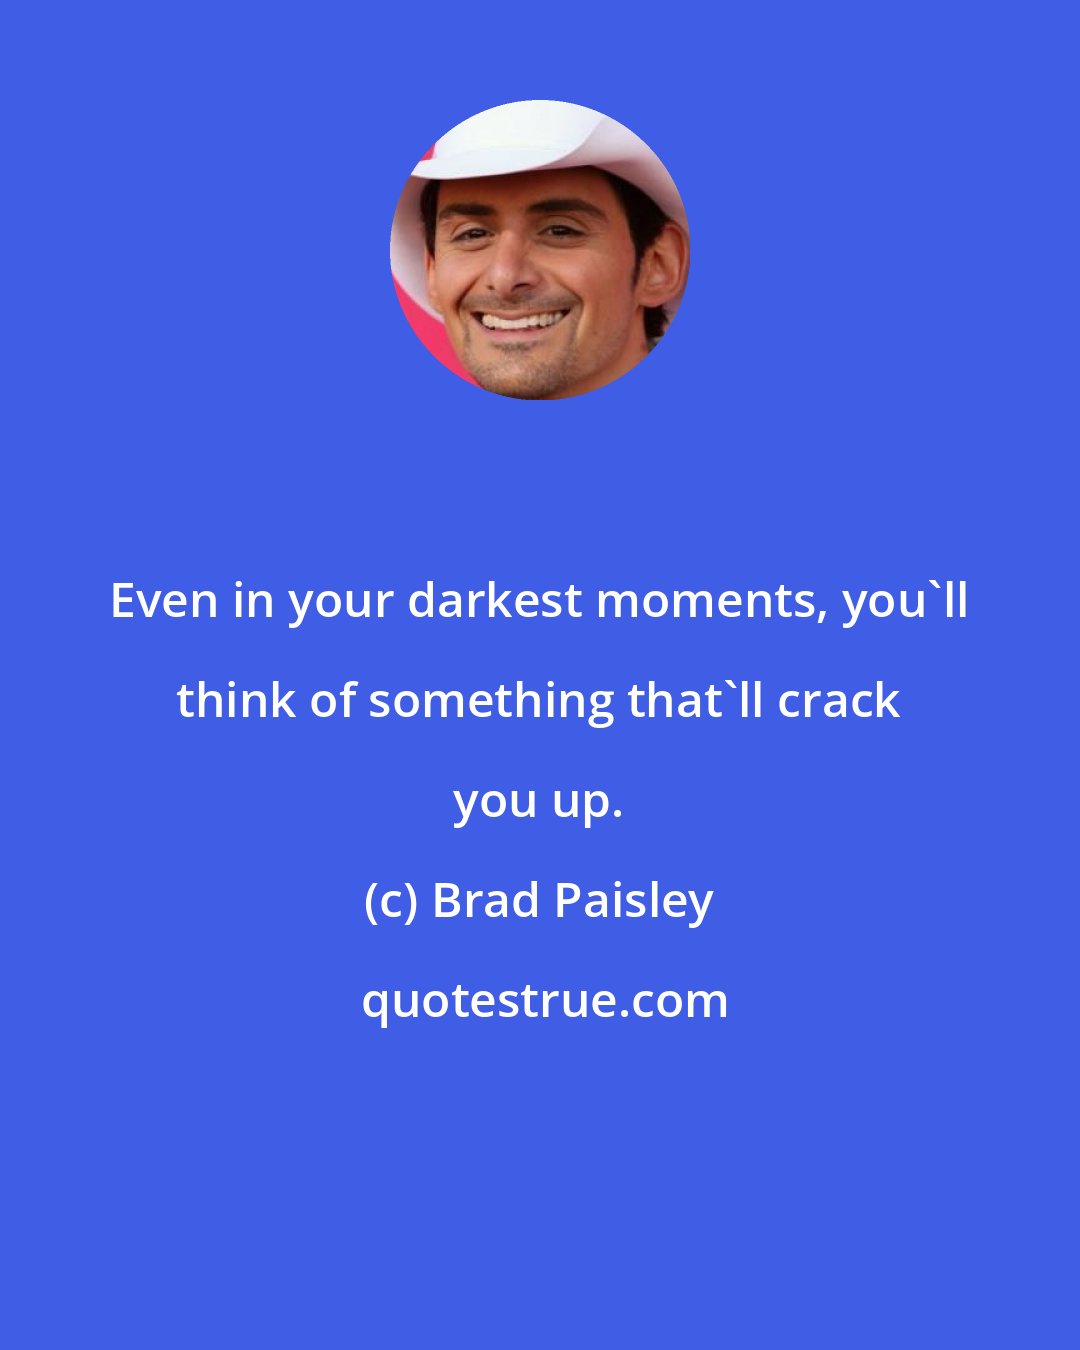 Brad Paisley: Even in your darkest moments, you'll think of something that'll crack you up.